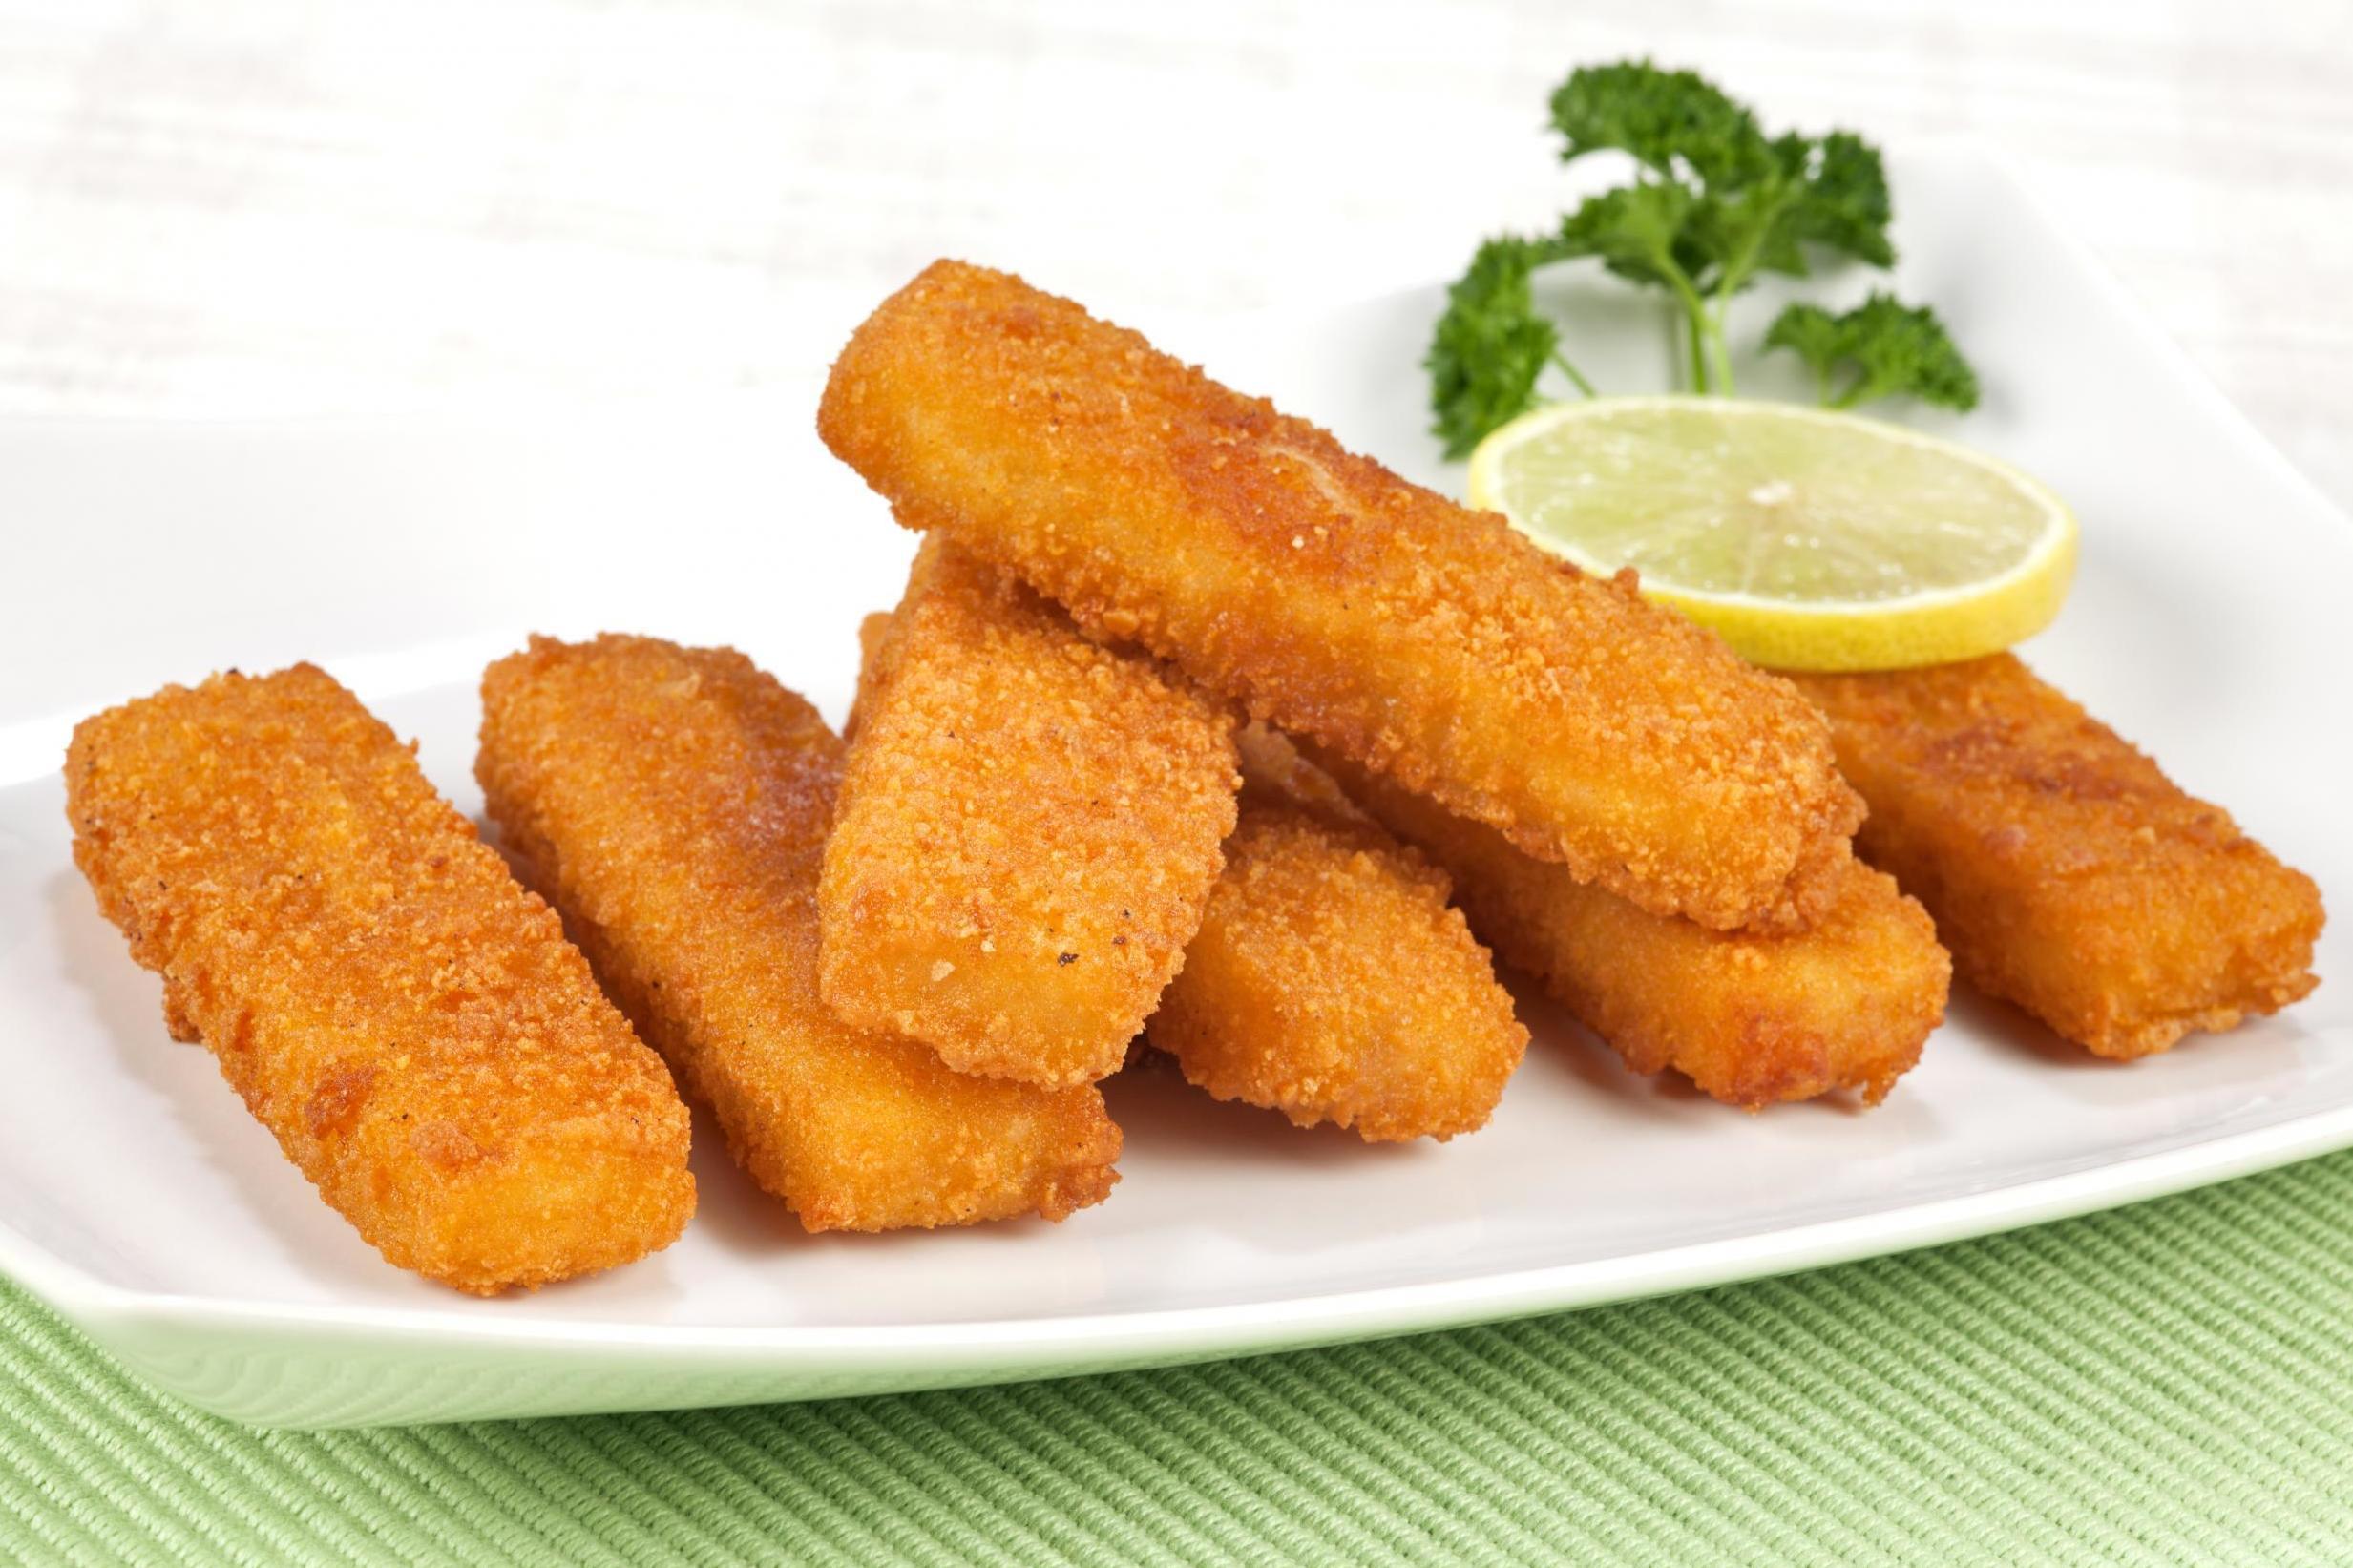 Fish fingers are a sustainable option (Stock)